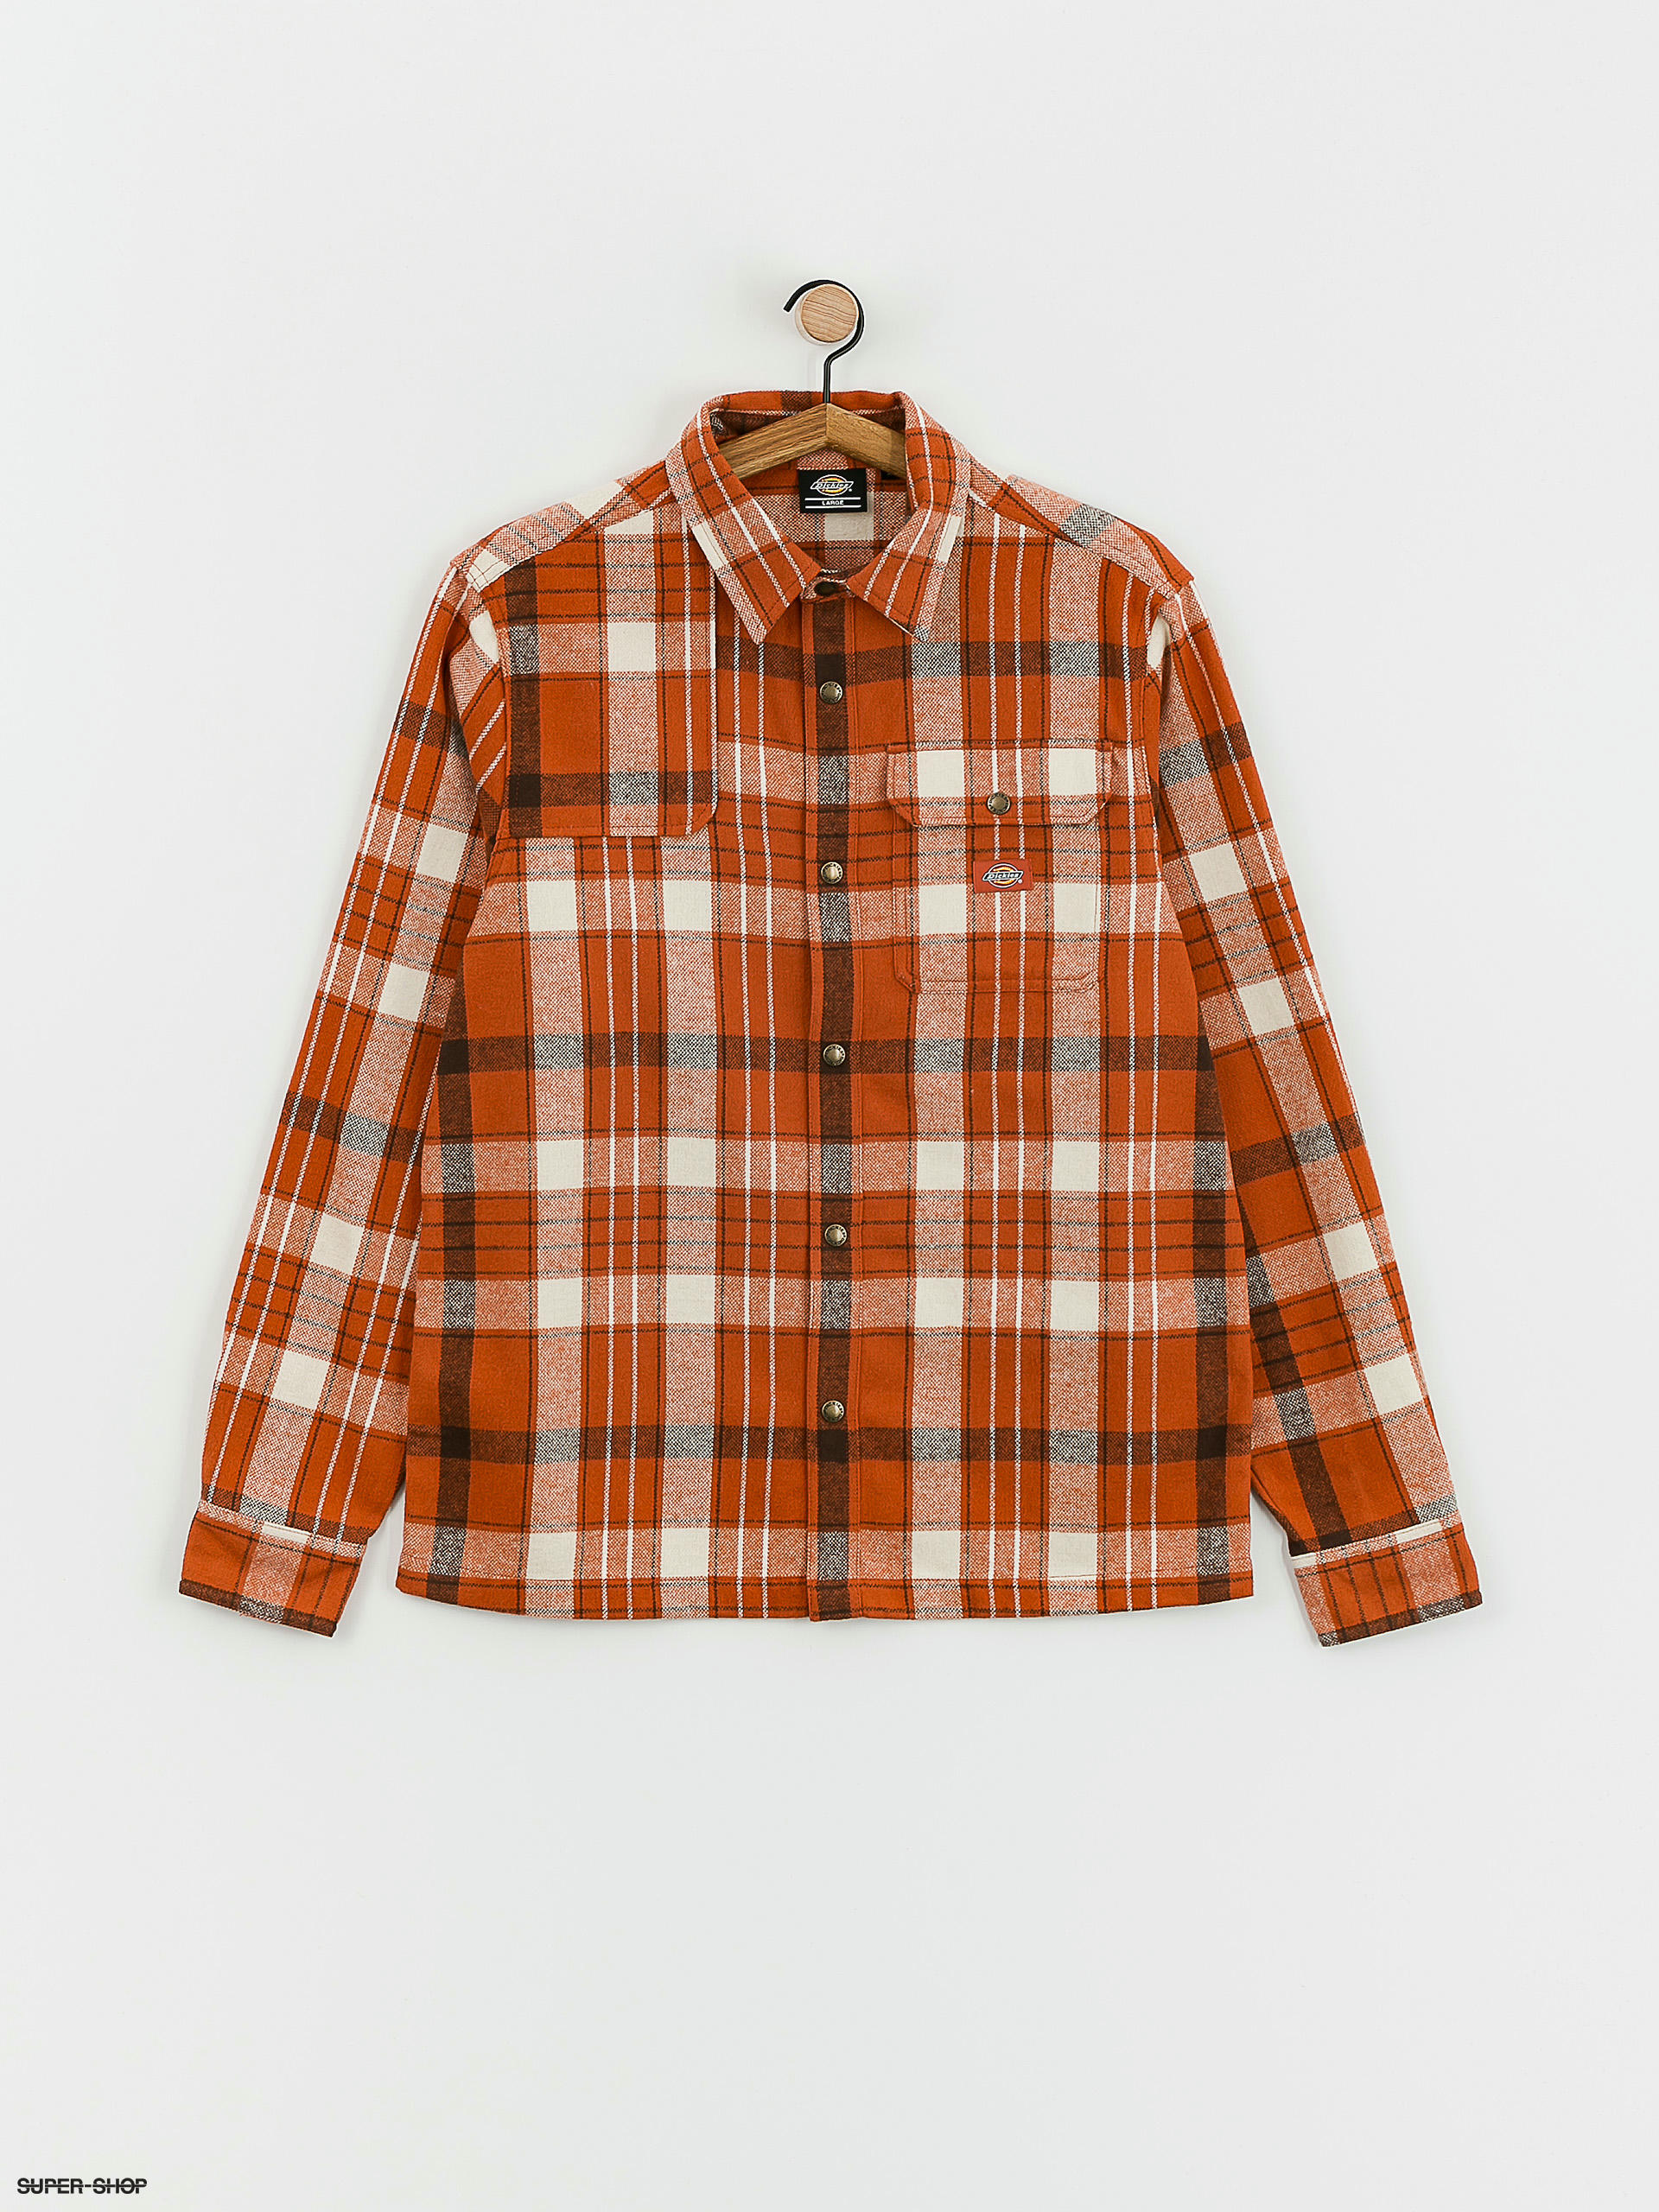 Dickies Nimmons Plaid Long Sleeve Shirt  Urban Outfitters Singapore -  Clothing, Music, Home & Accessories